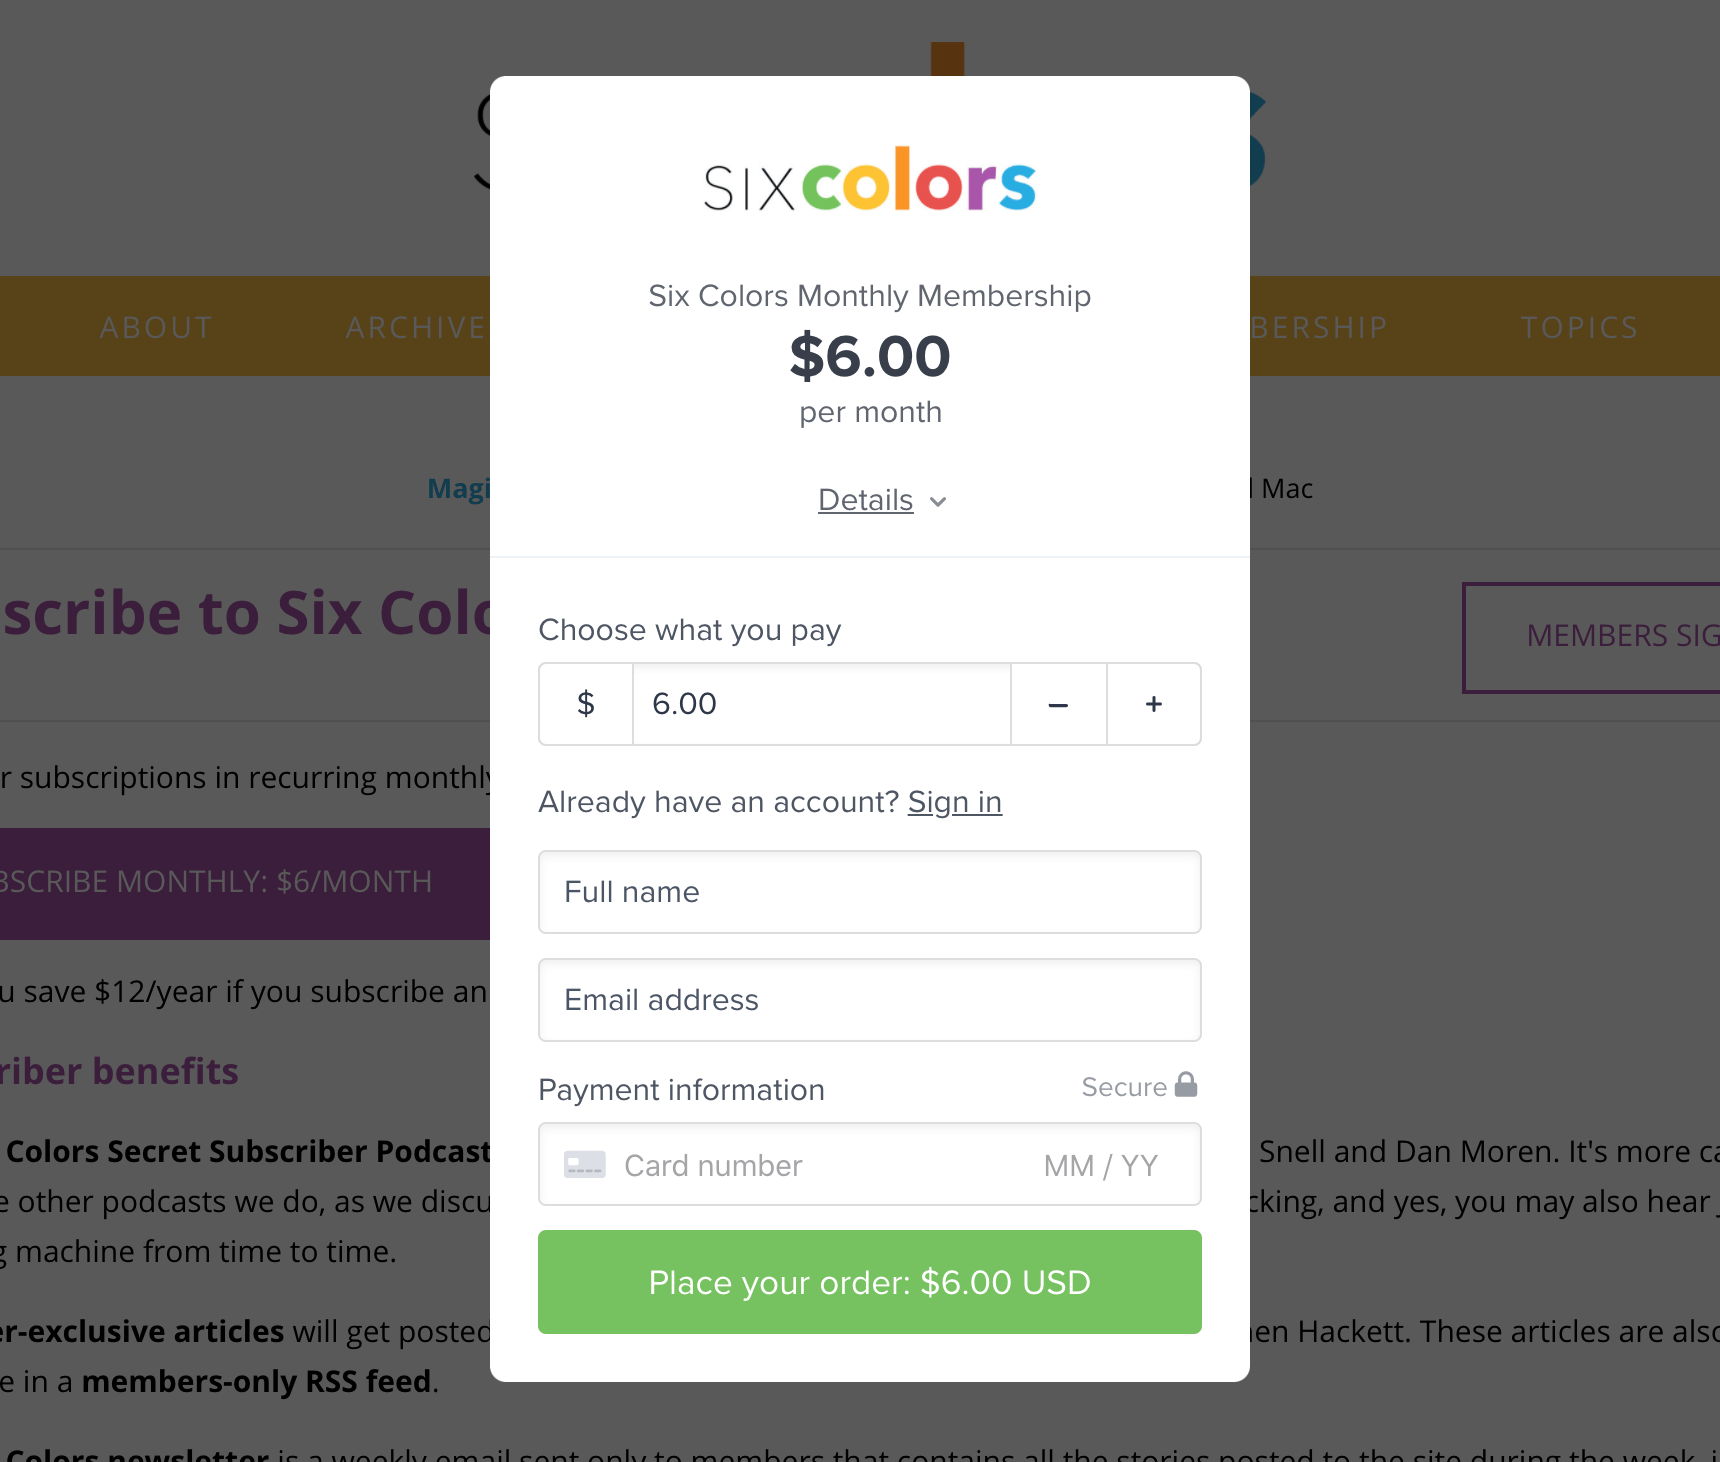 Choose what you pay in checkout